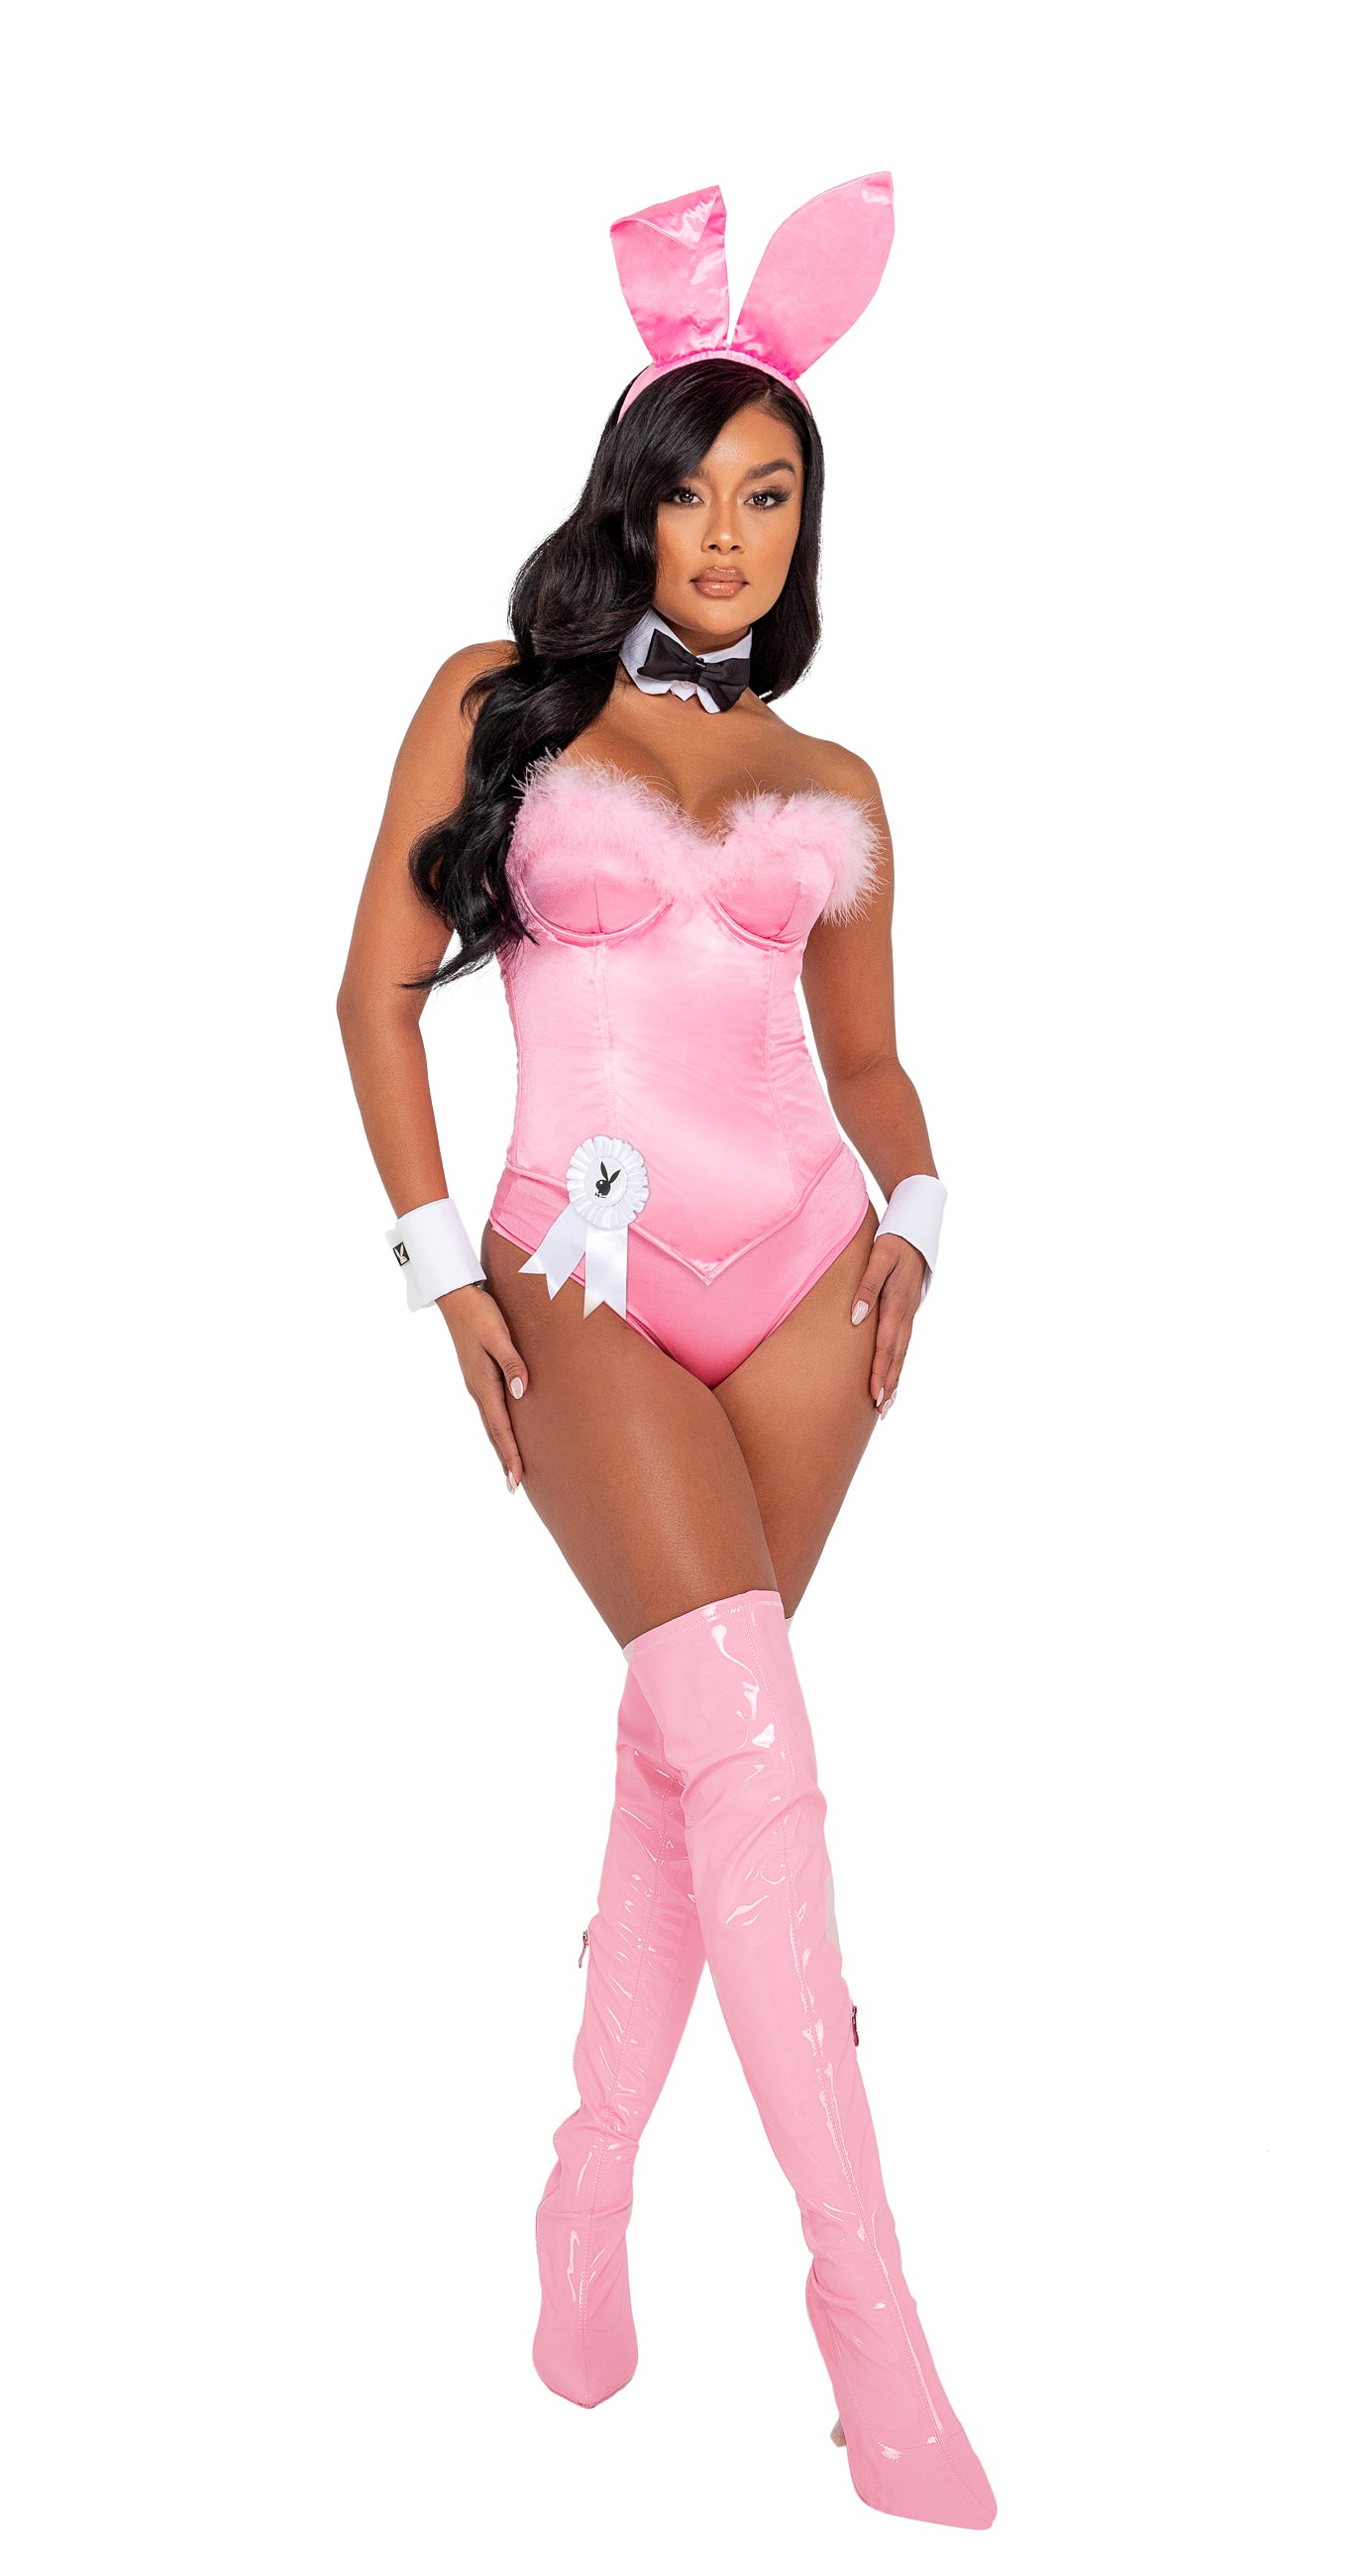 9 Piece Playboy Boudoir Bunny Costume by ROMA in Black or Pink in Size XS, S, M, L, or XL